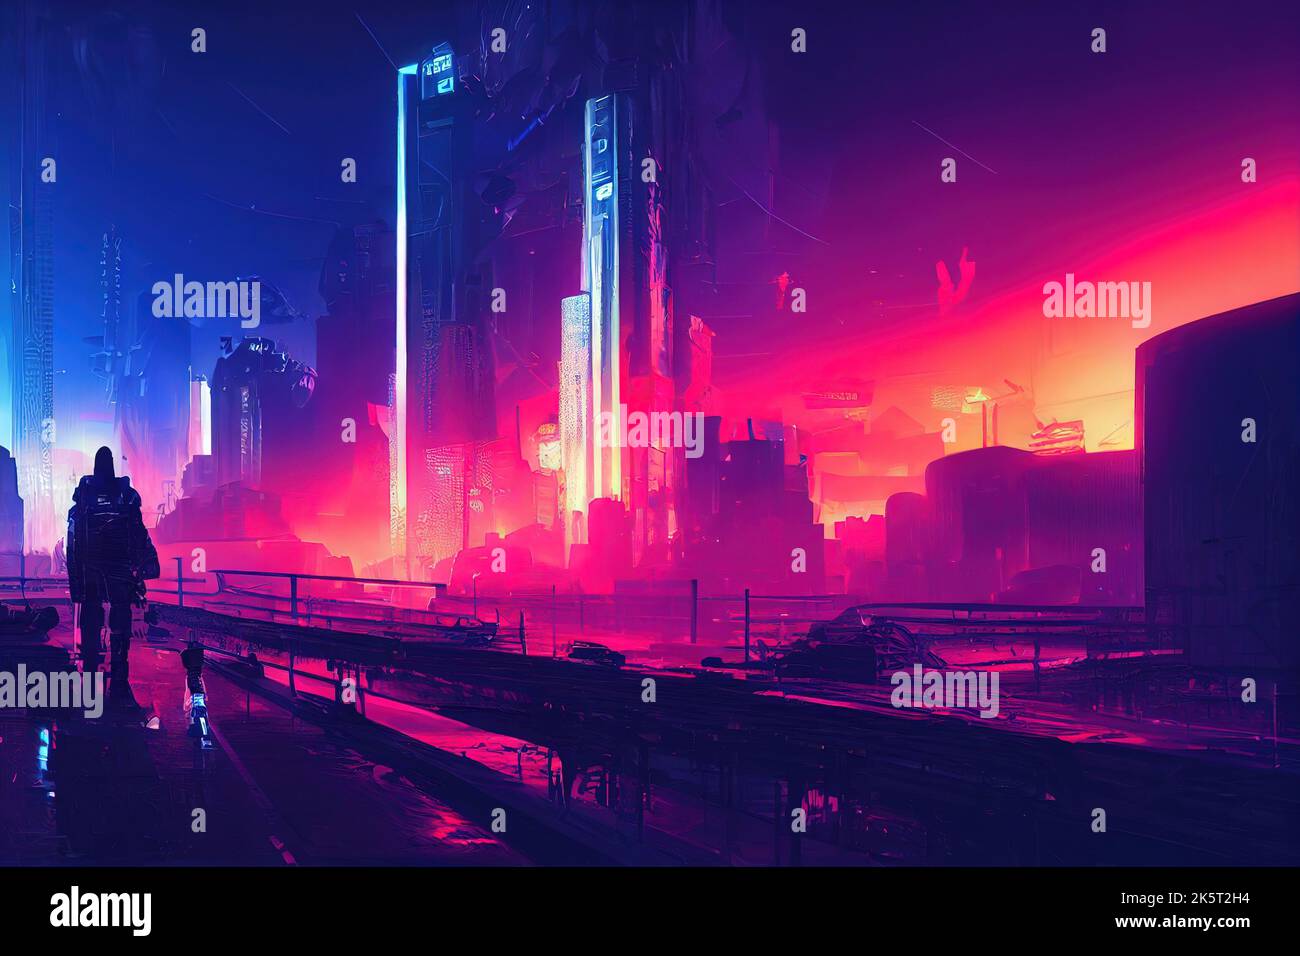 Cyberpunk City Background Images, HD Pictures and Wallpaper For